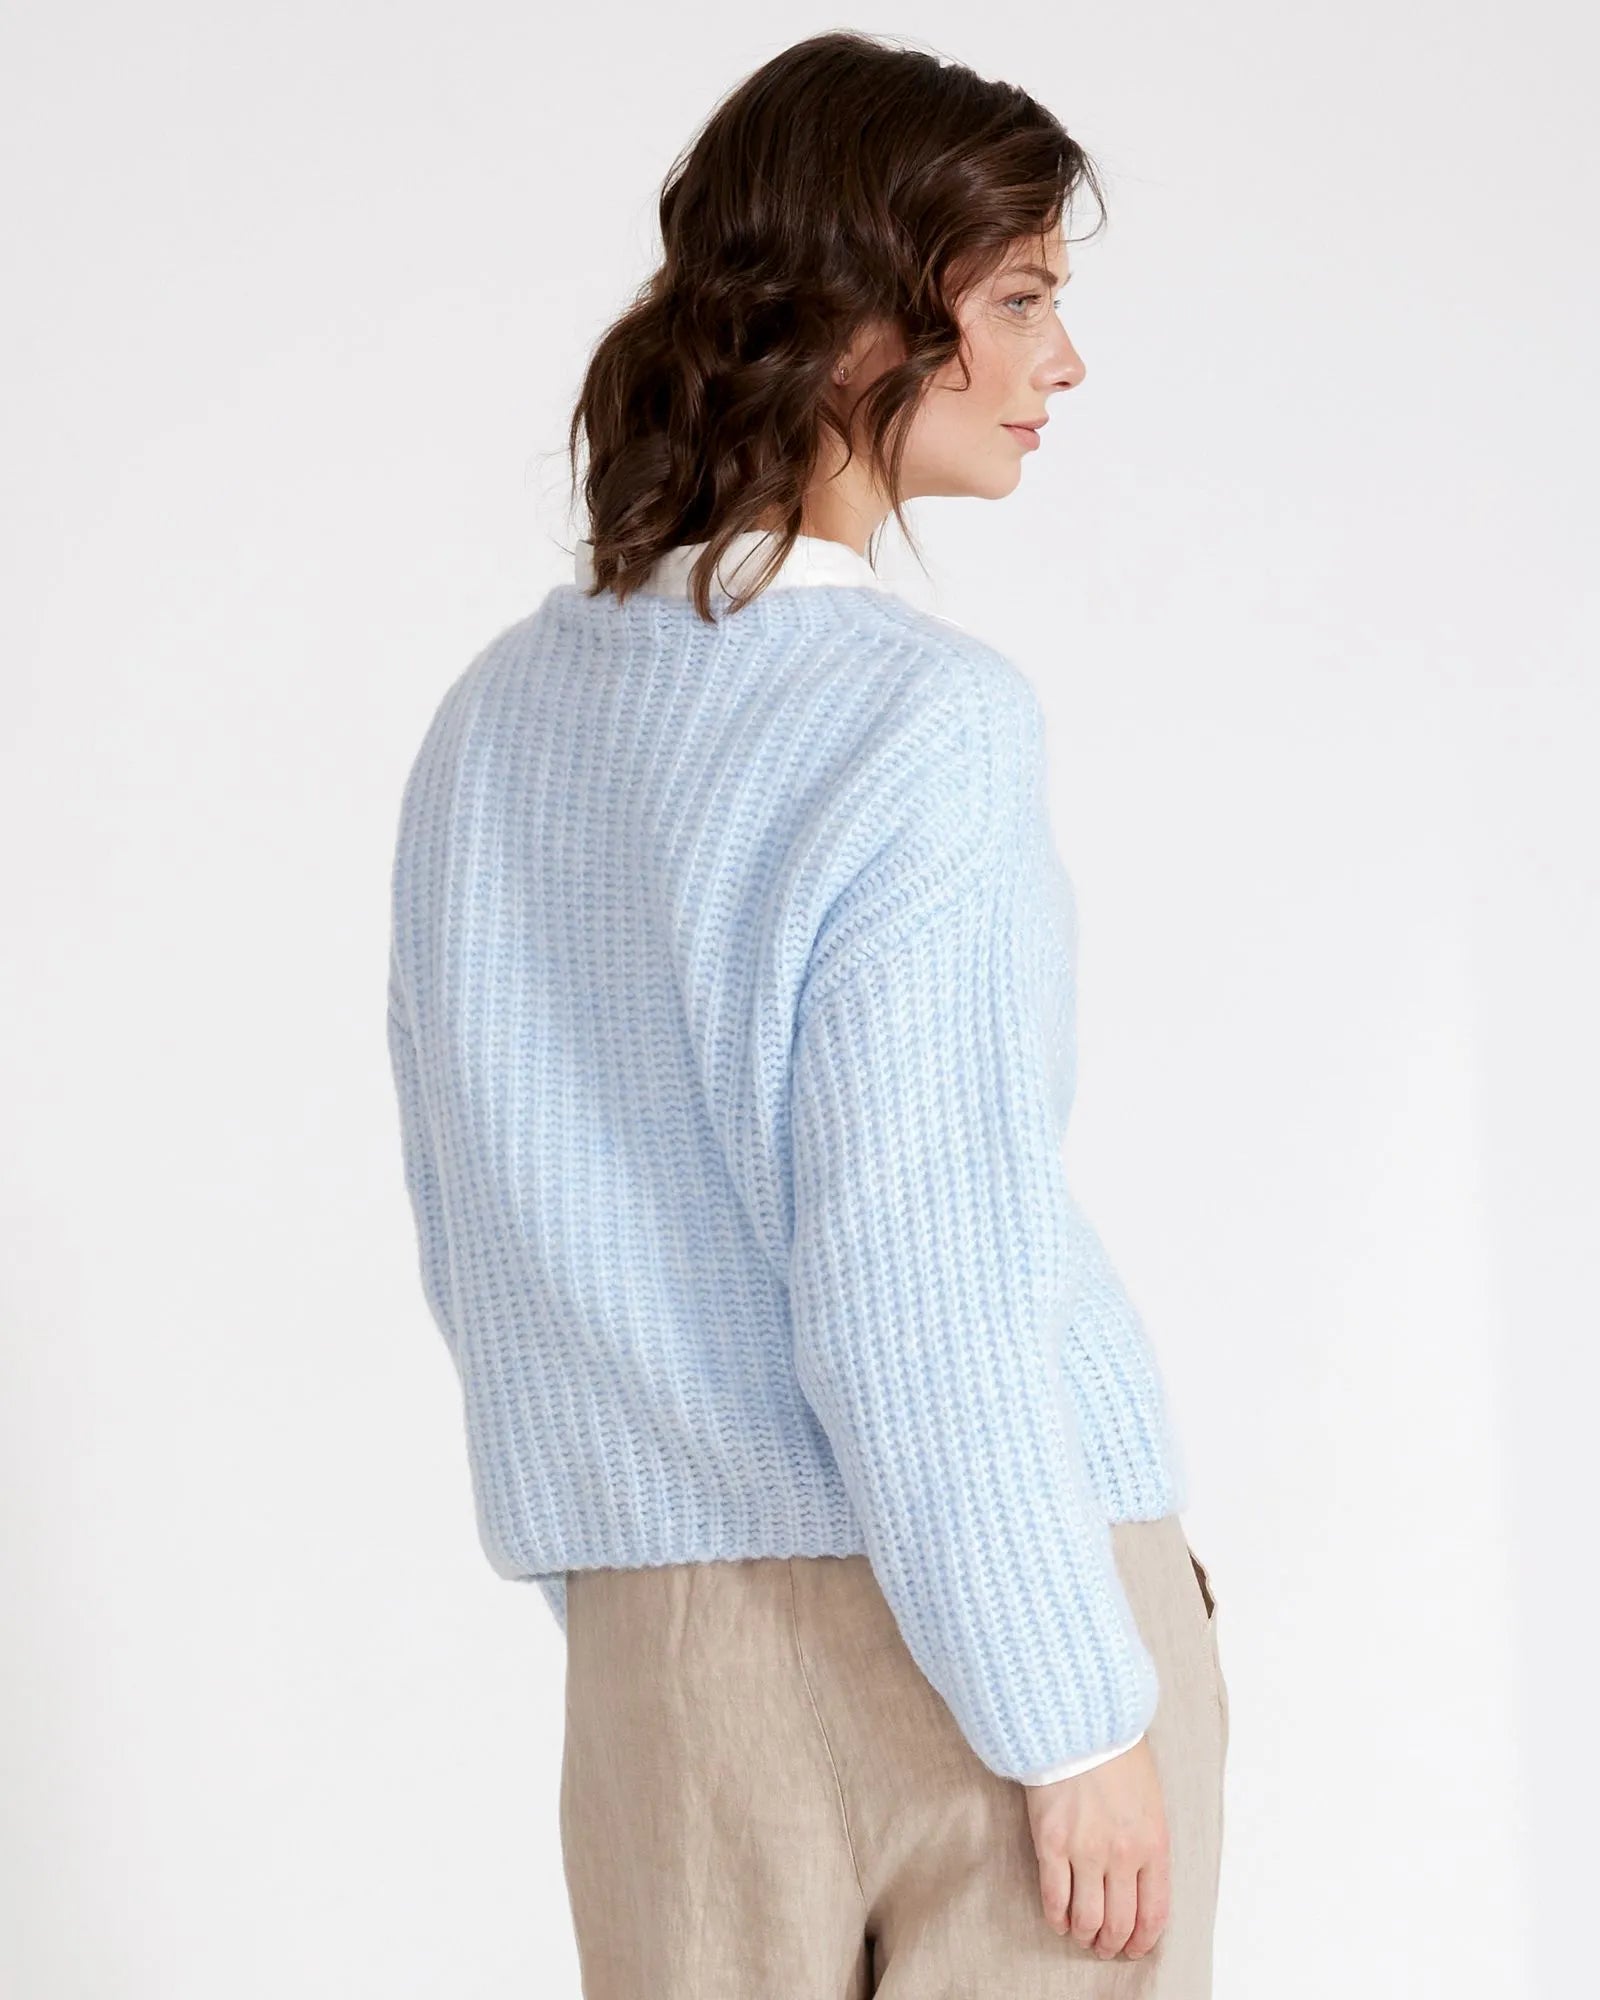 Cajsa Super Soft Knitted Sweater - Pale Sky